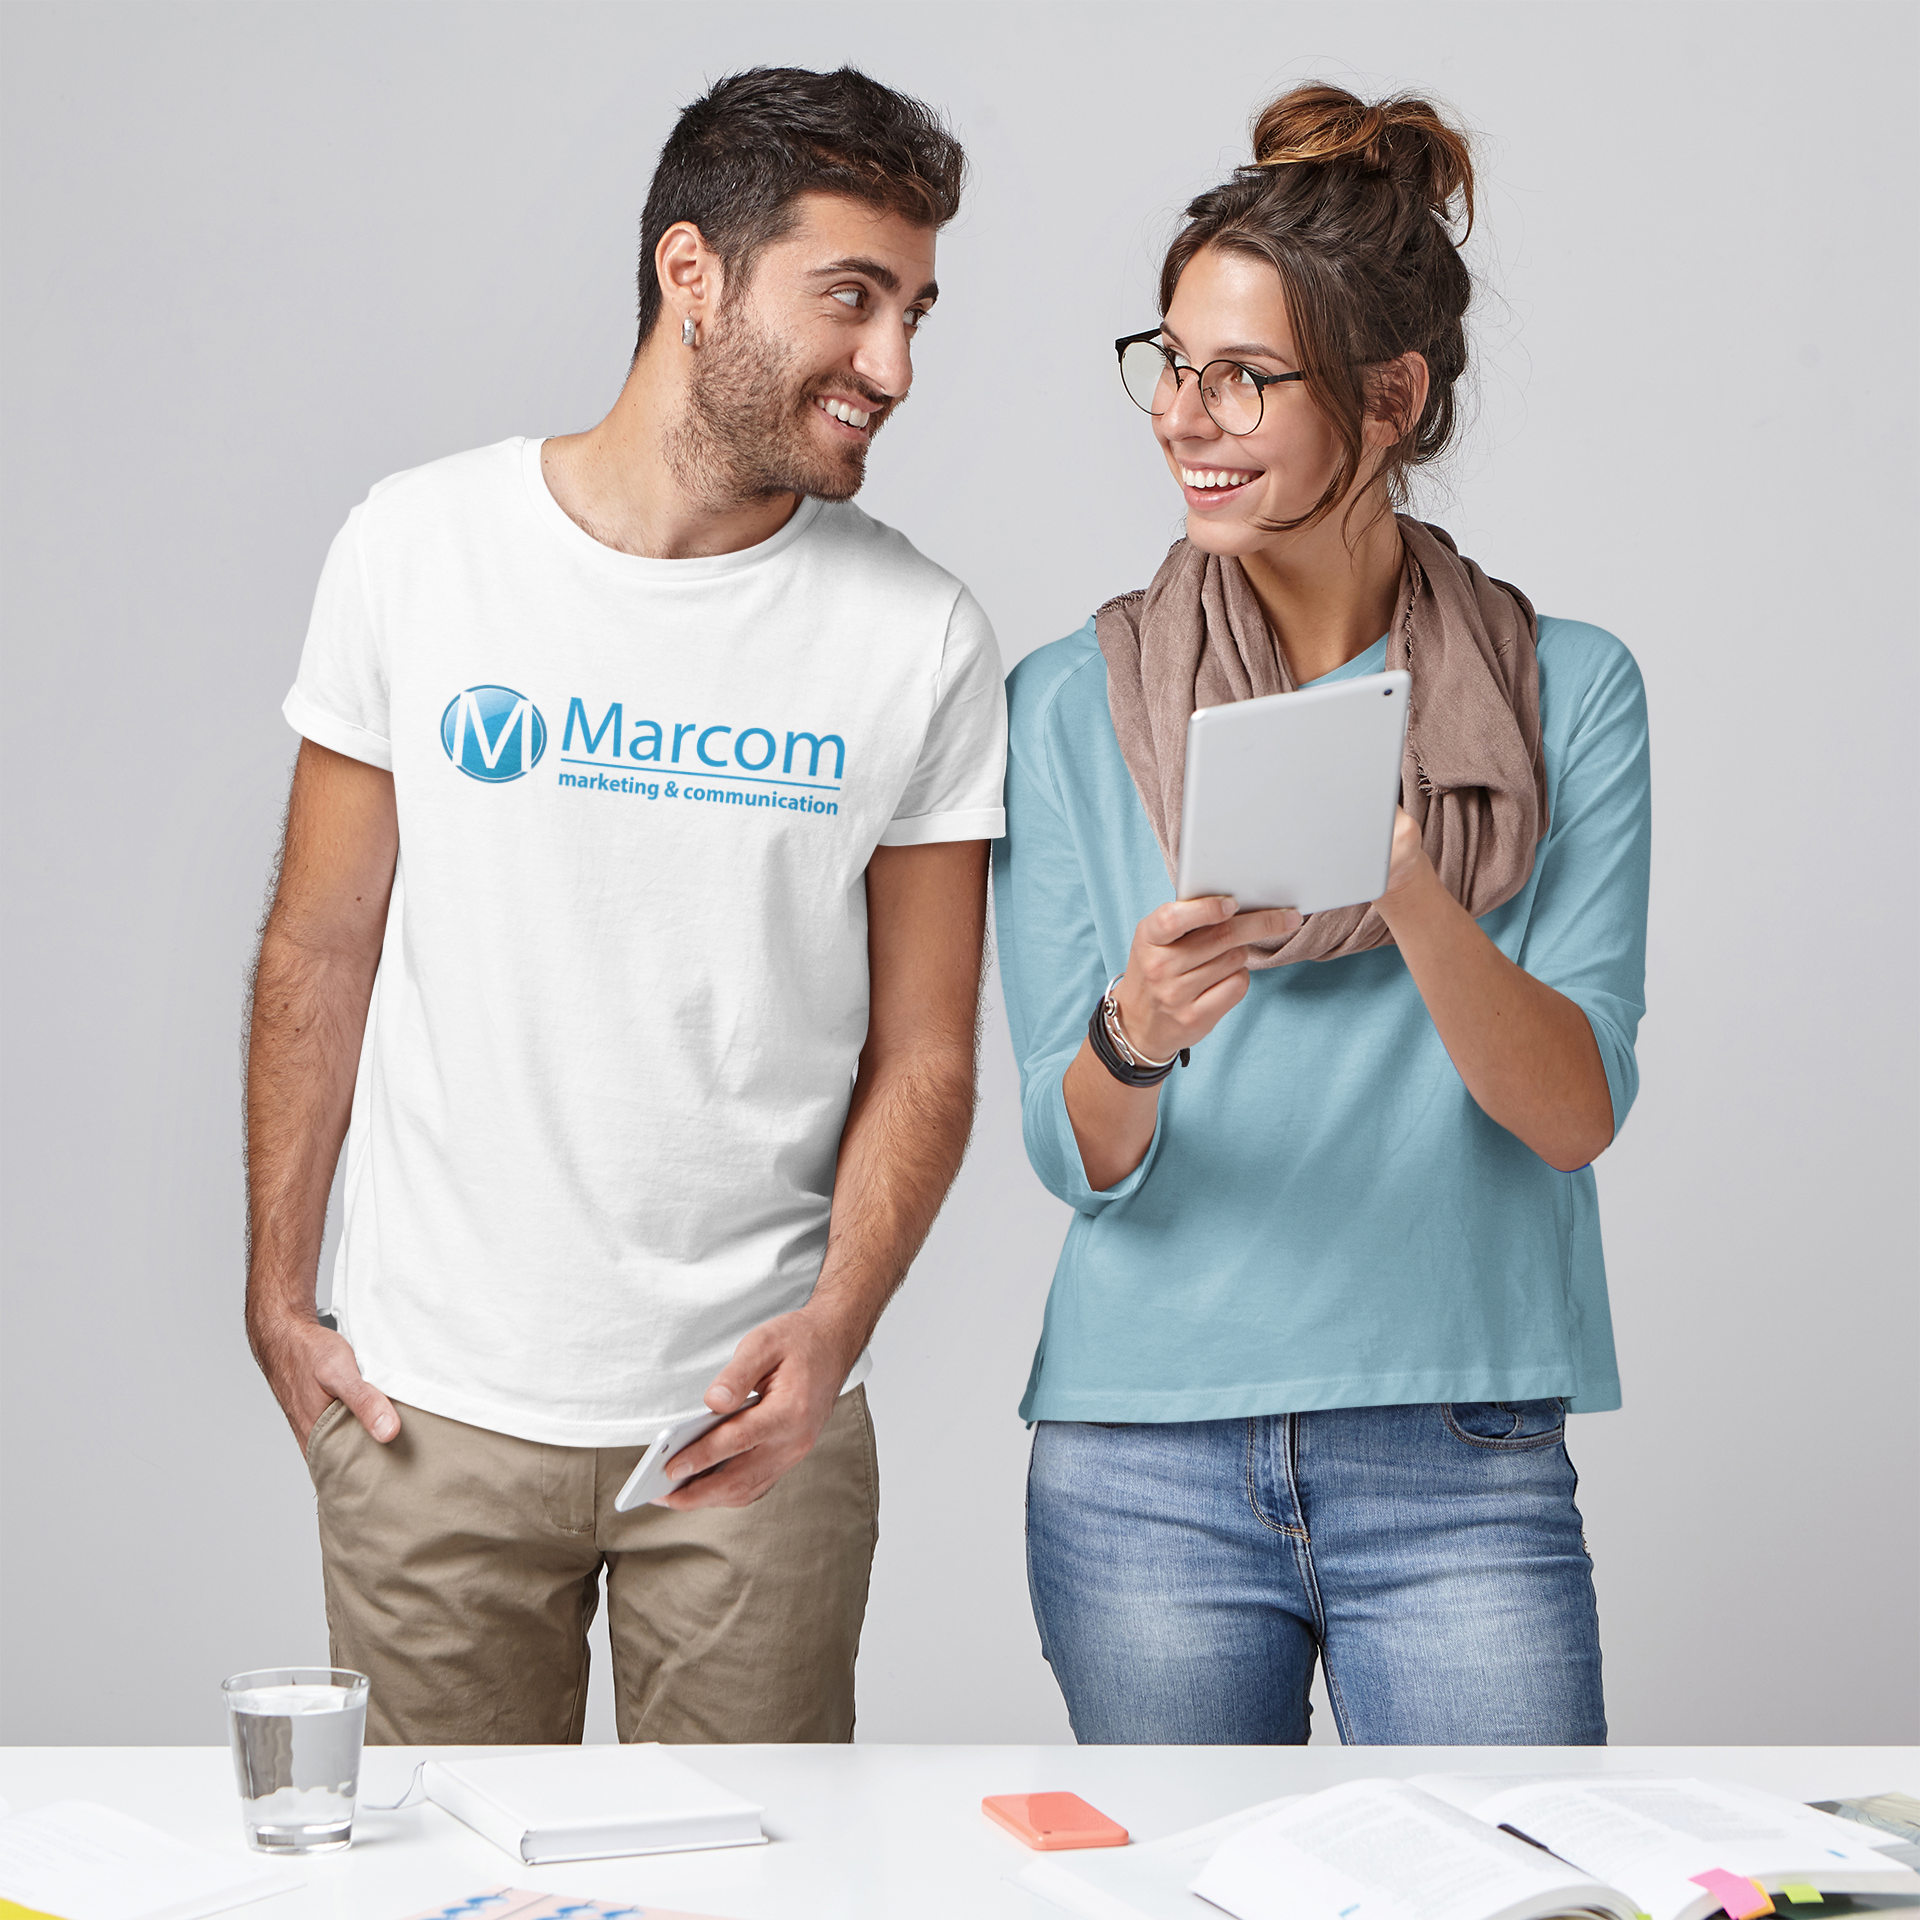 MarCom Agency Insights: Enhancing Your Brand's Communication